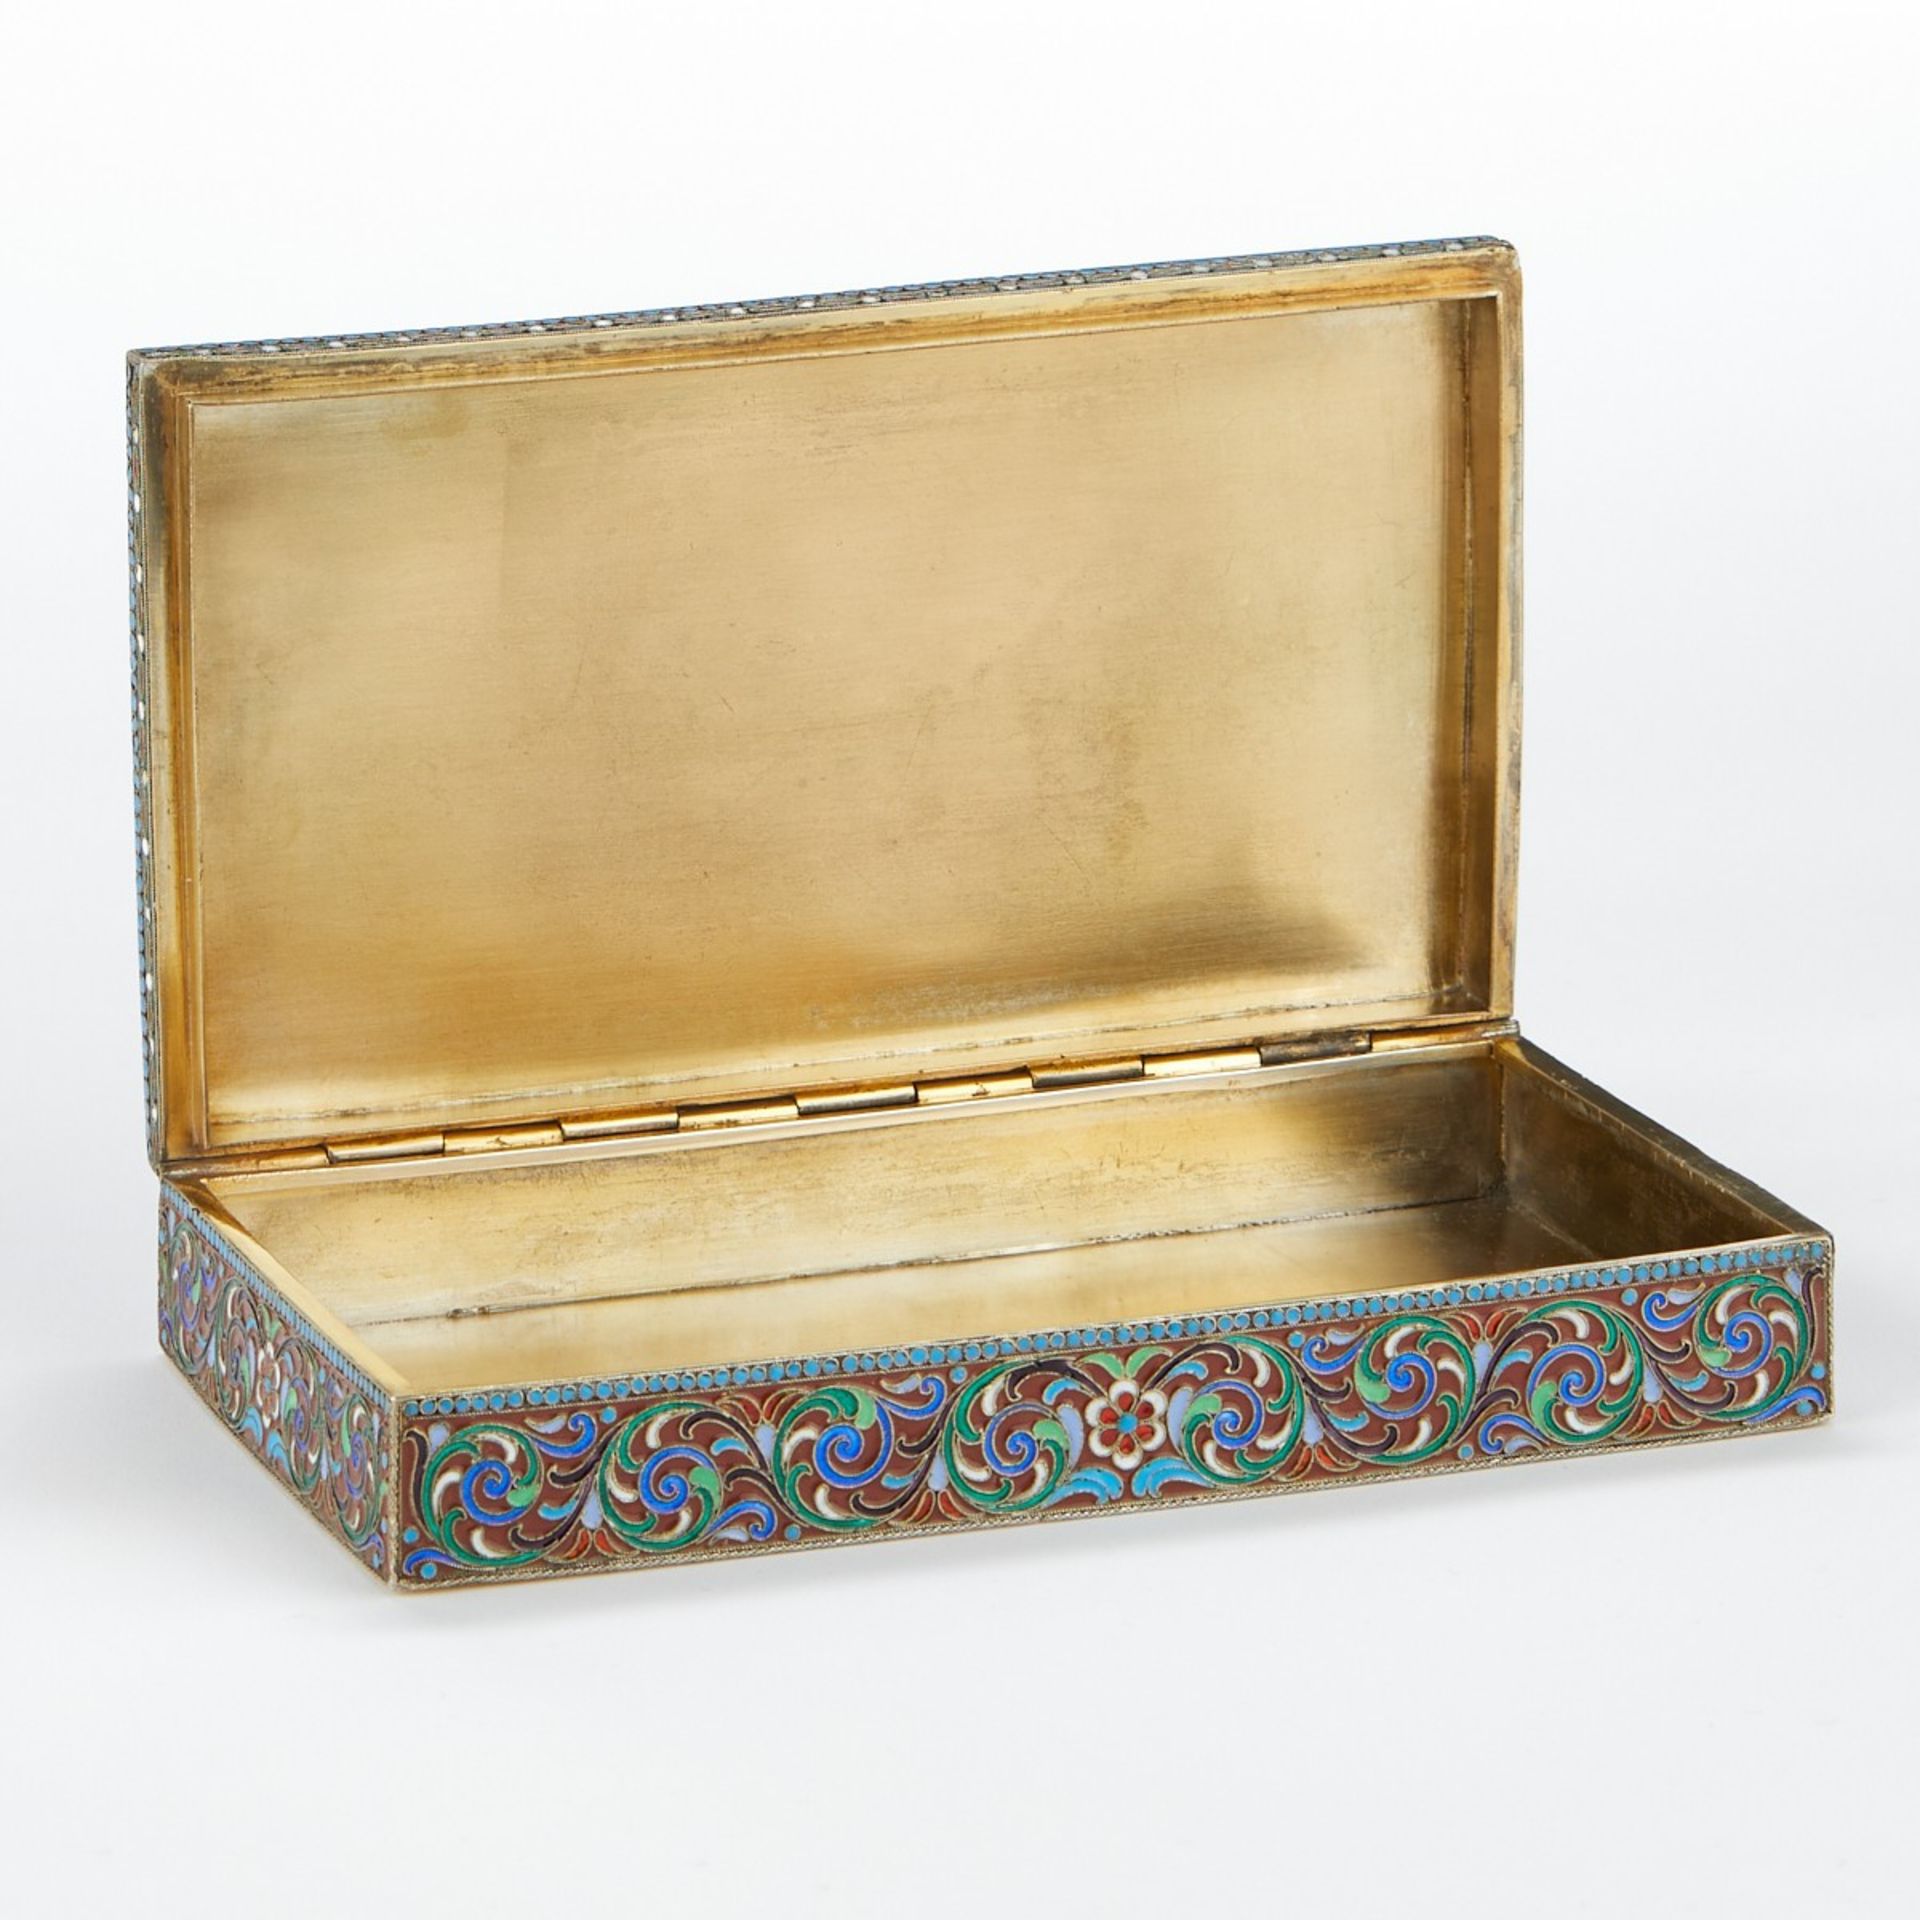 Russian Enameled Silver Tabletop Cigarette Box - Image 2 of 17